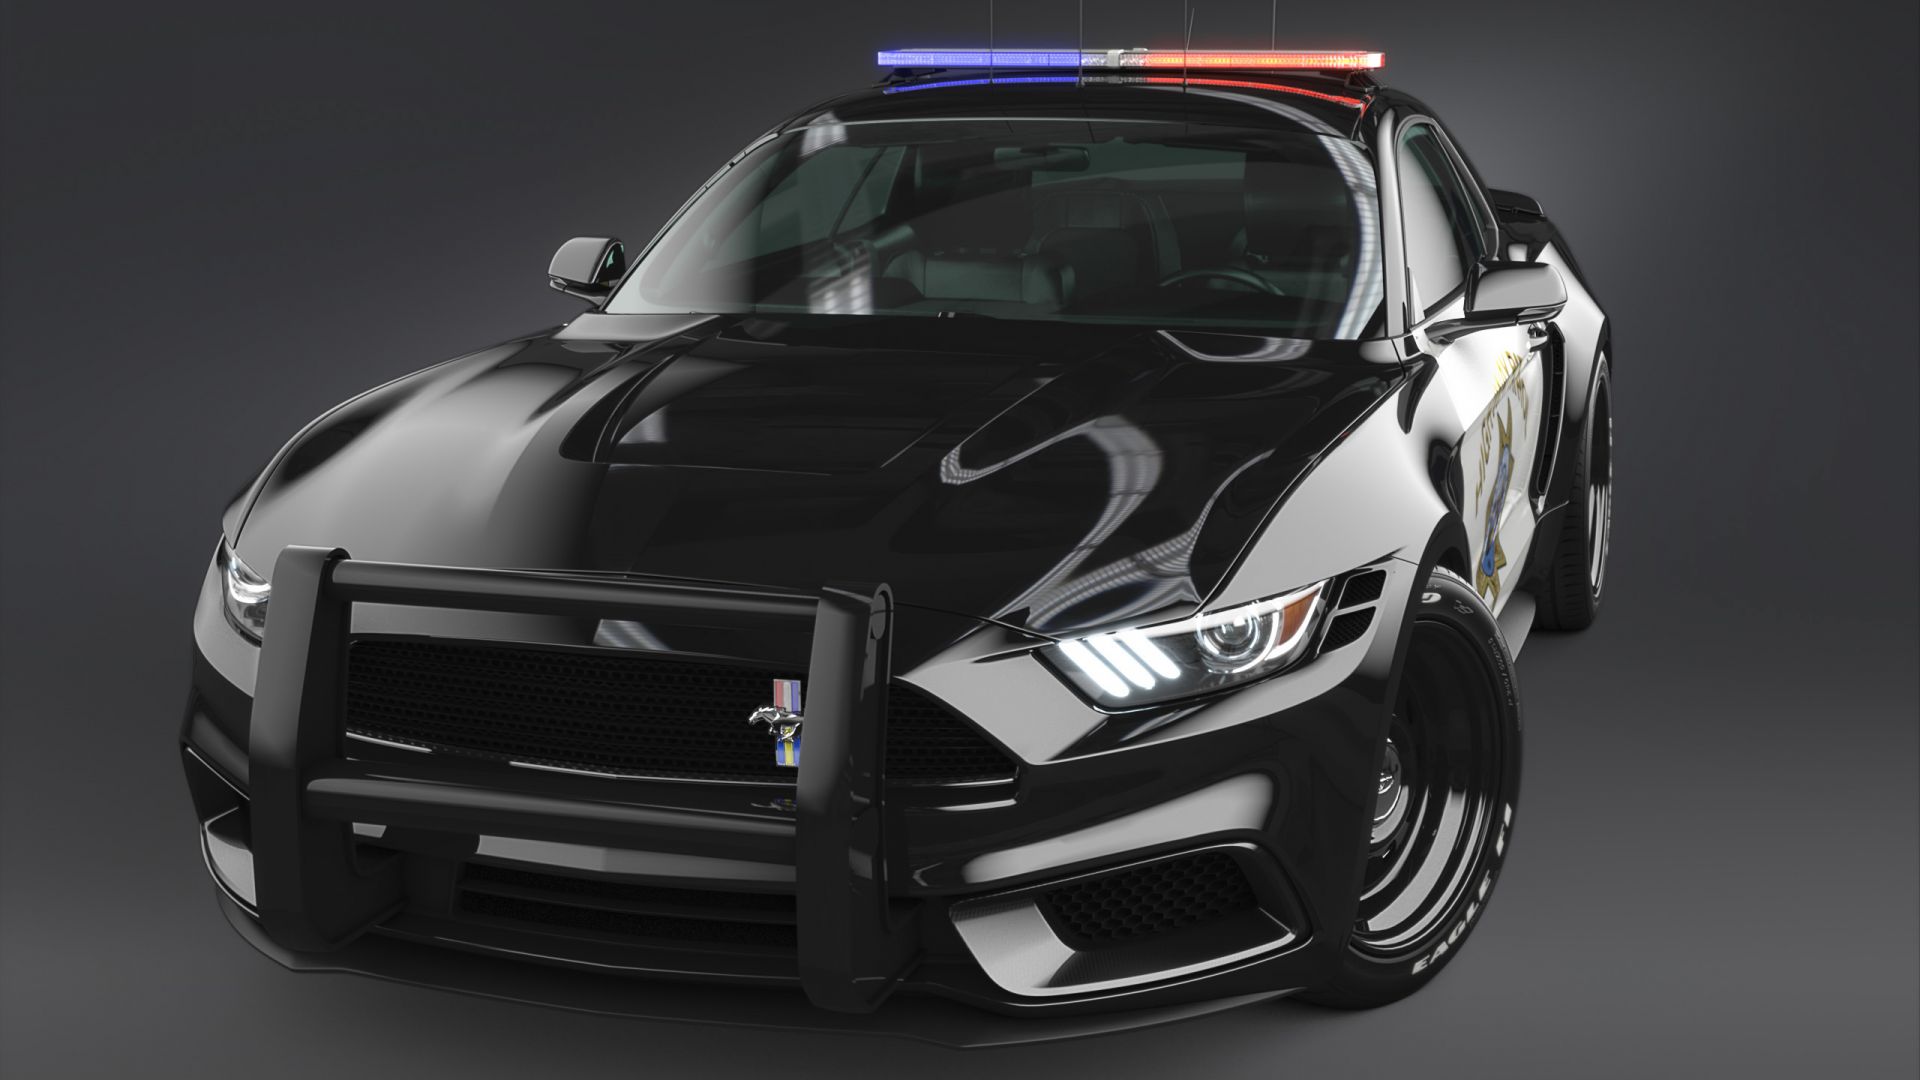 Wallpaper Ford Mustang, black police car, front view